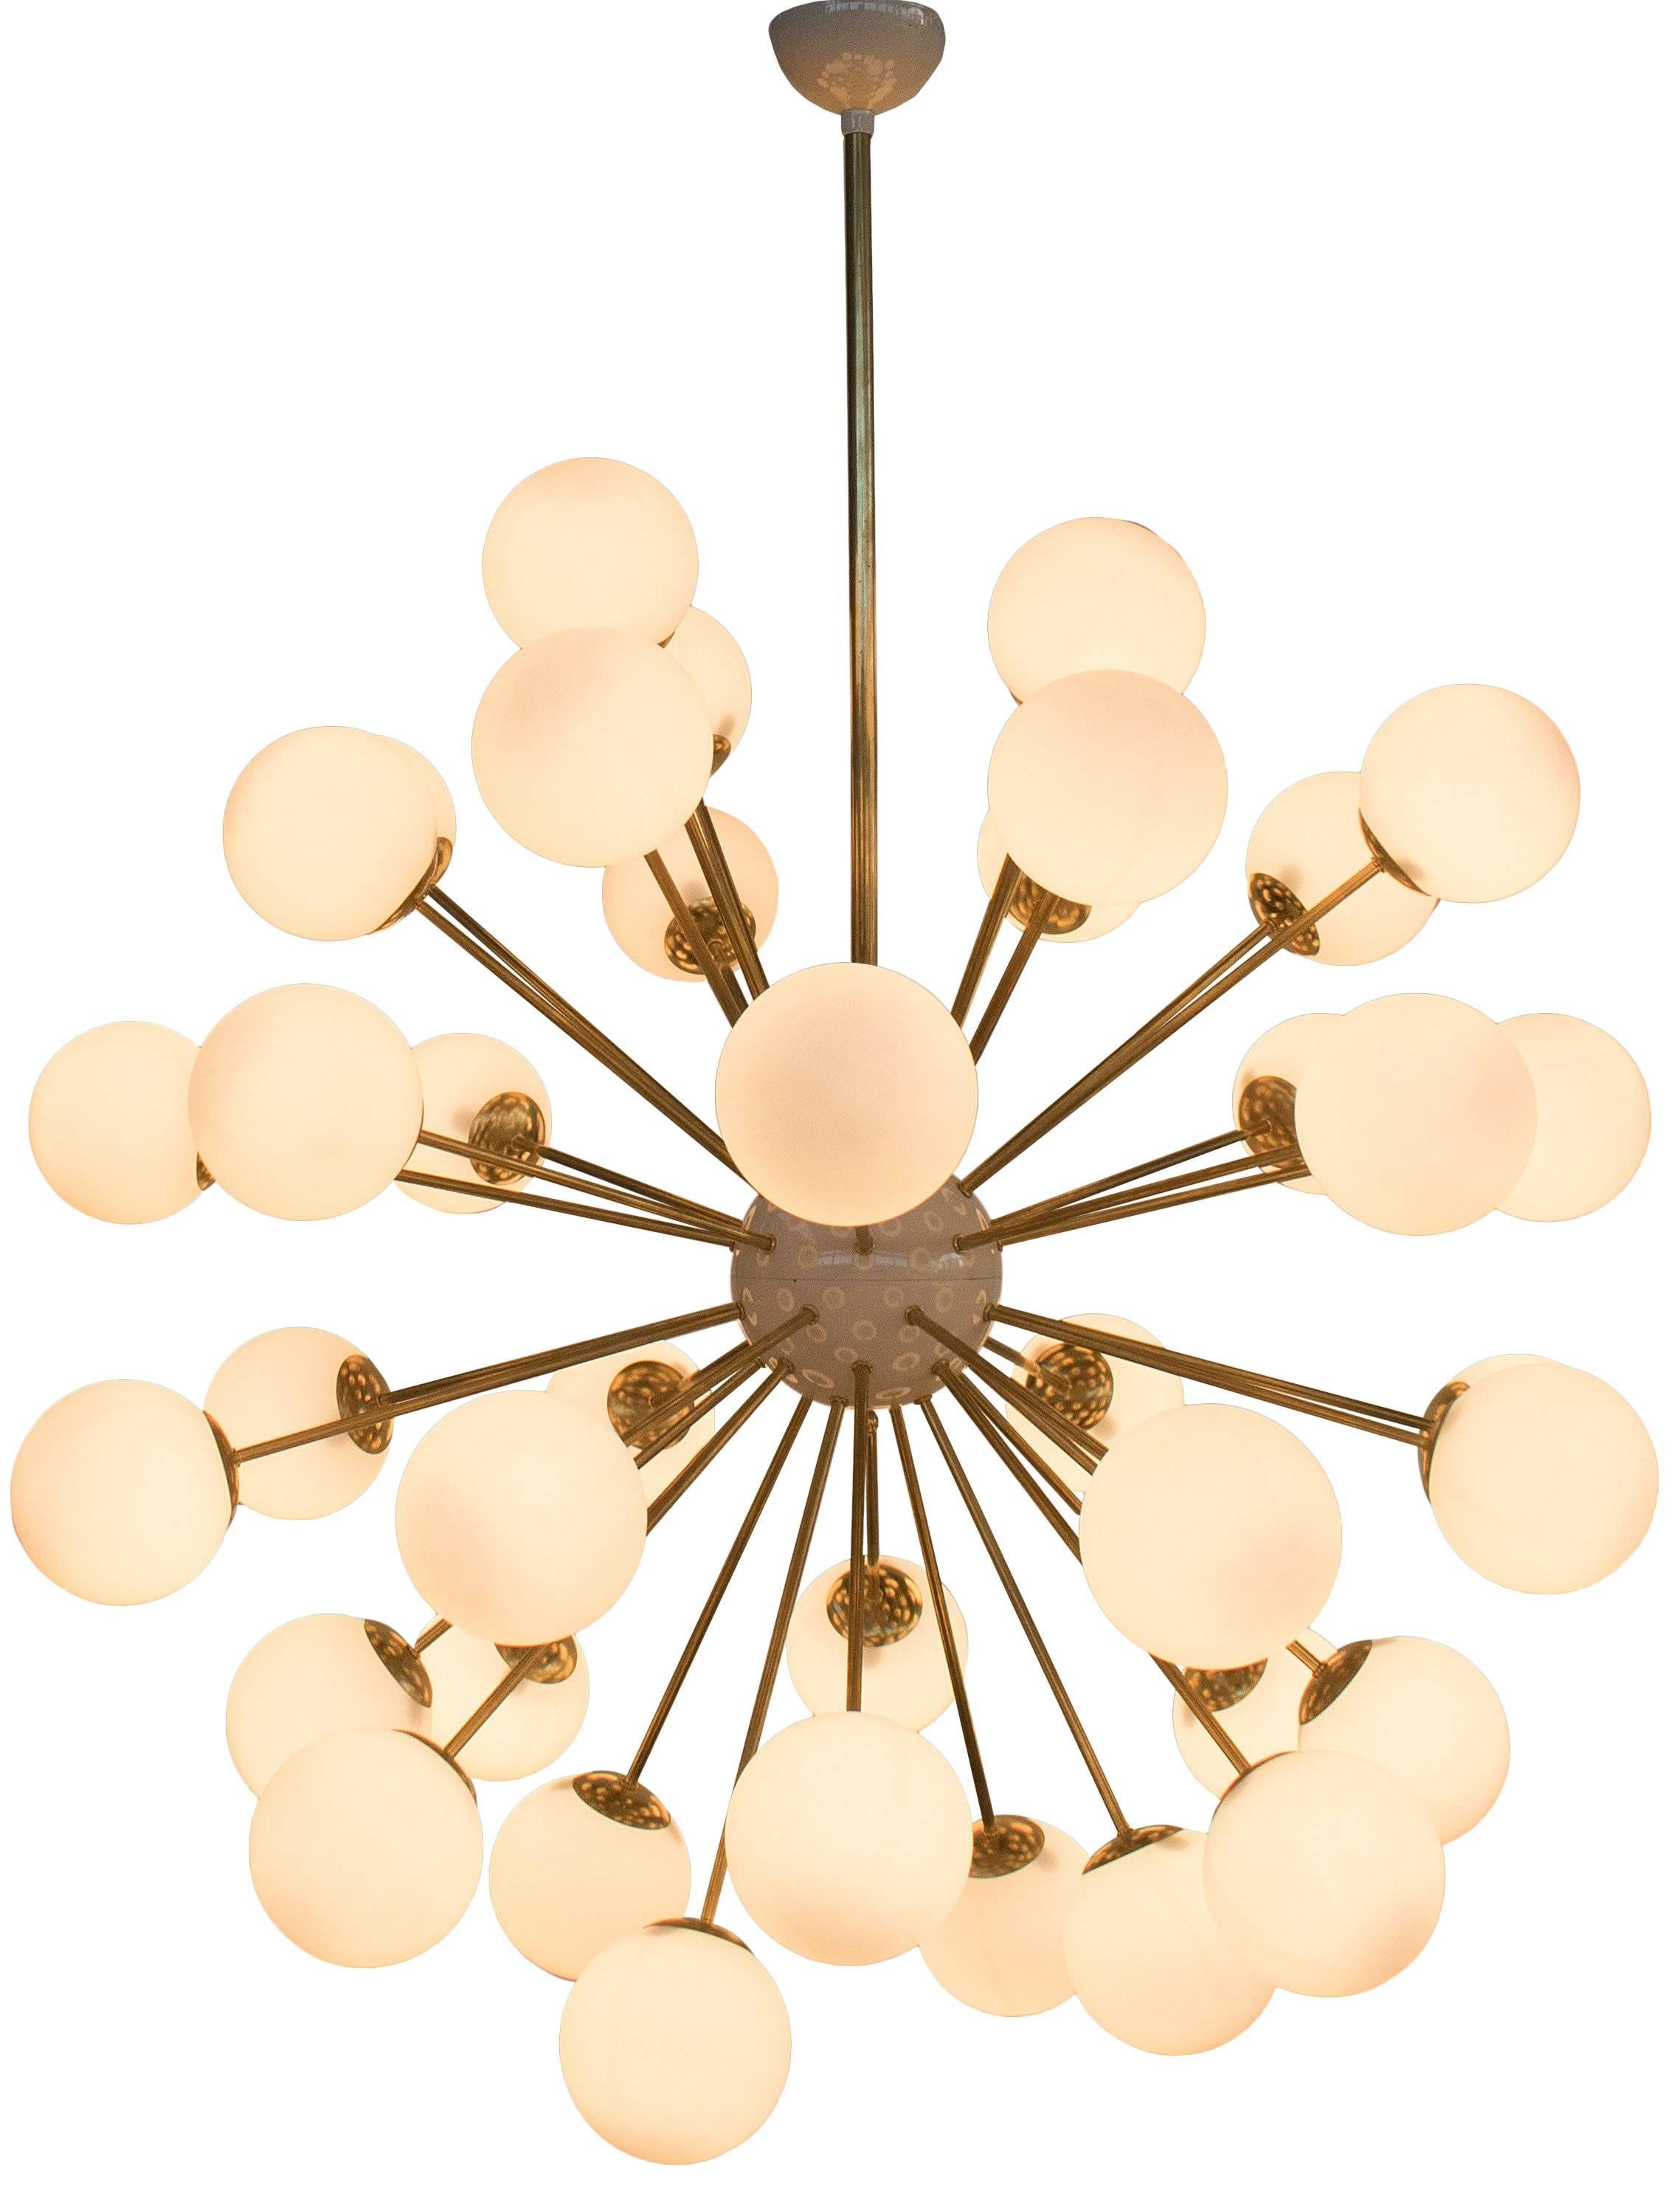 Italian sputnik chandelier with 40 Murano glass globes mounted on brass frame / Designed by Fabio Bergomi for Fabio Ltd / Made in Italy
40 lights / E12 or E14 type / max 40W each
Measures: diameter 49 inches / height 59 inches including rod and